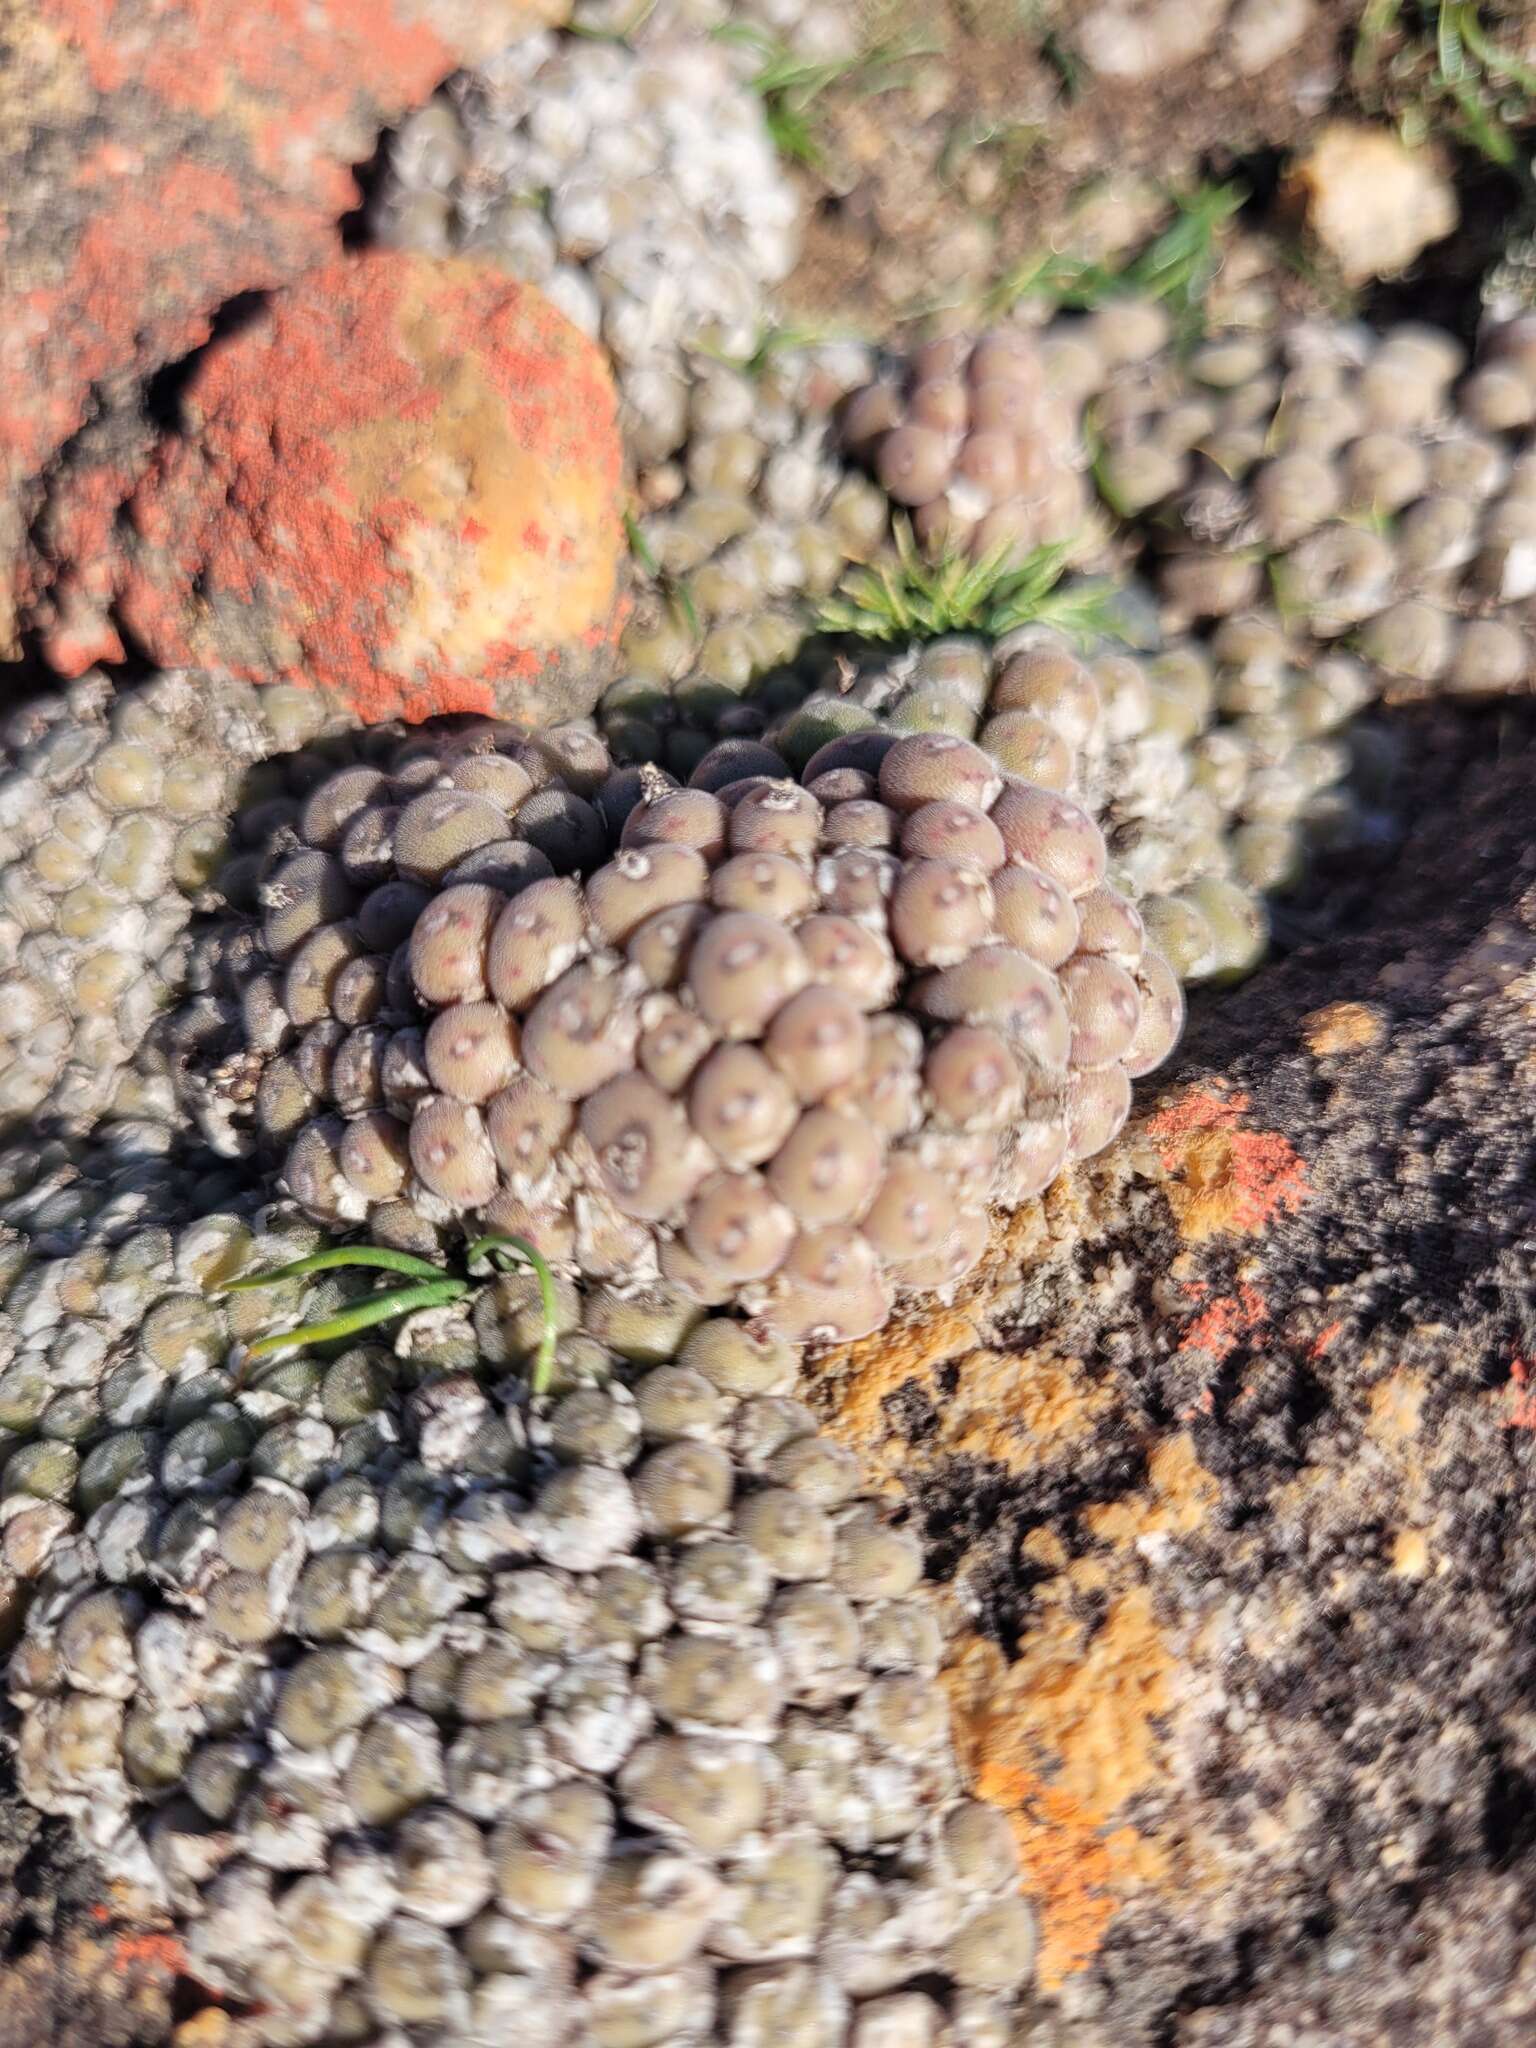 Image of Conophytum minusculum subsp. leipoldtii (N. E. Br.) S. A. Hammer